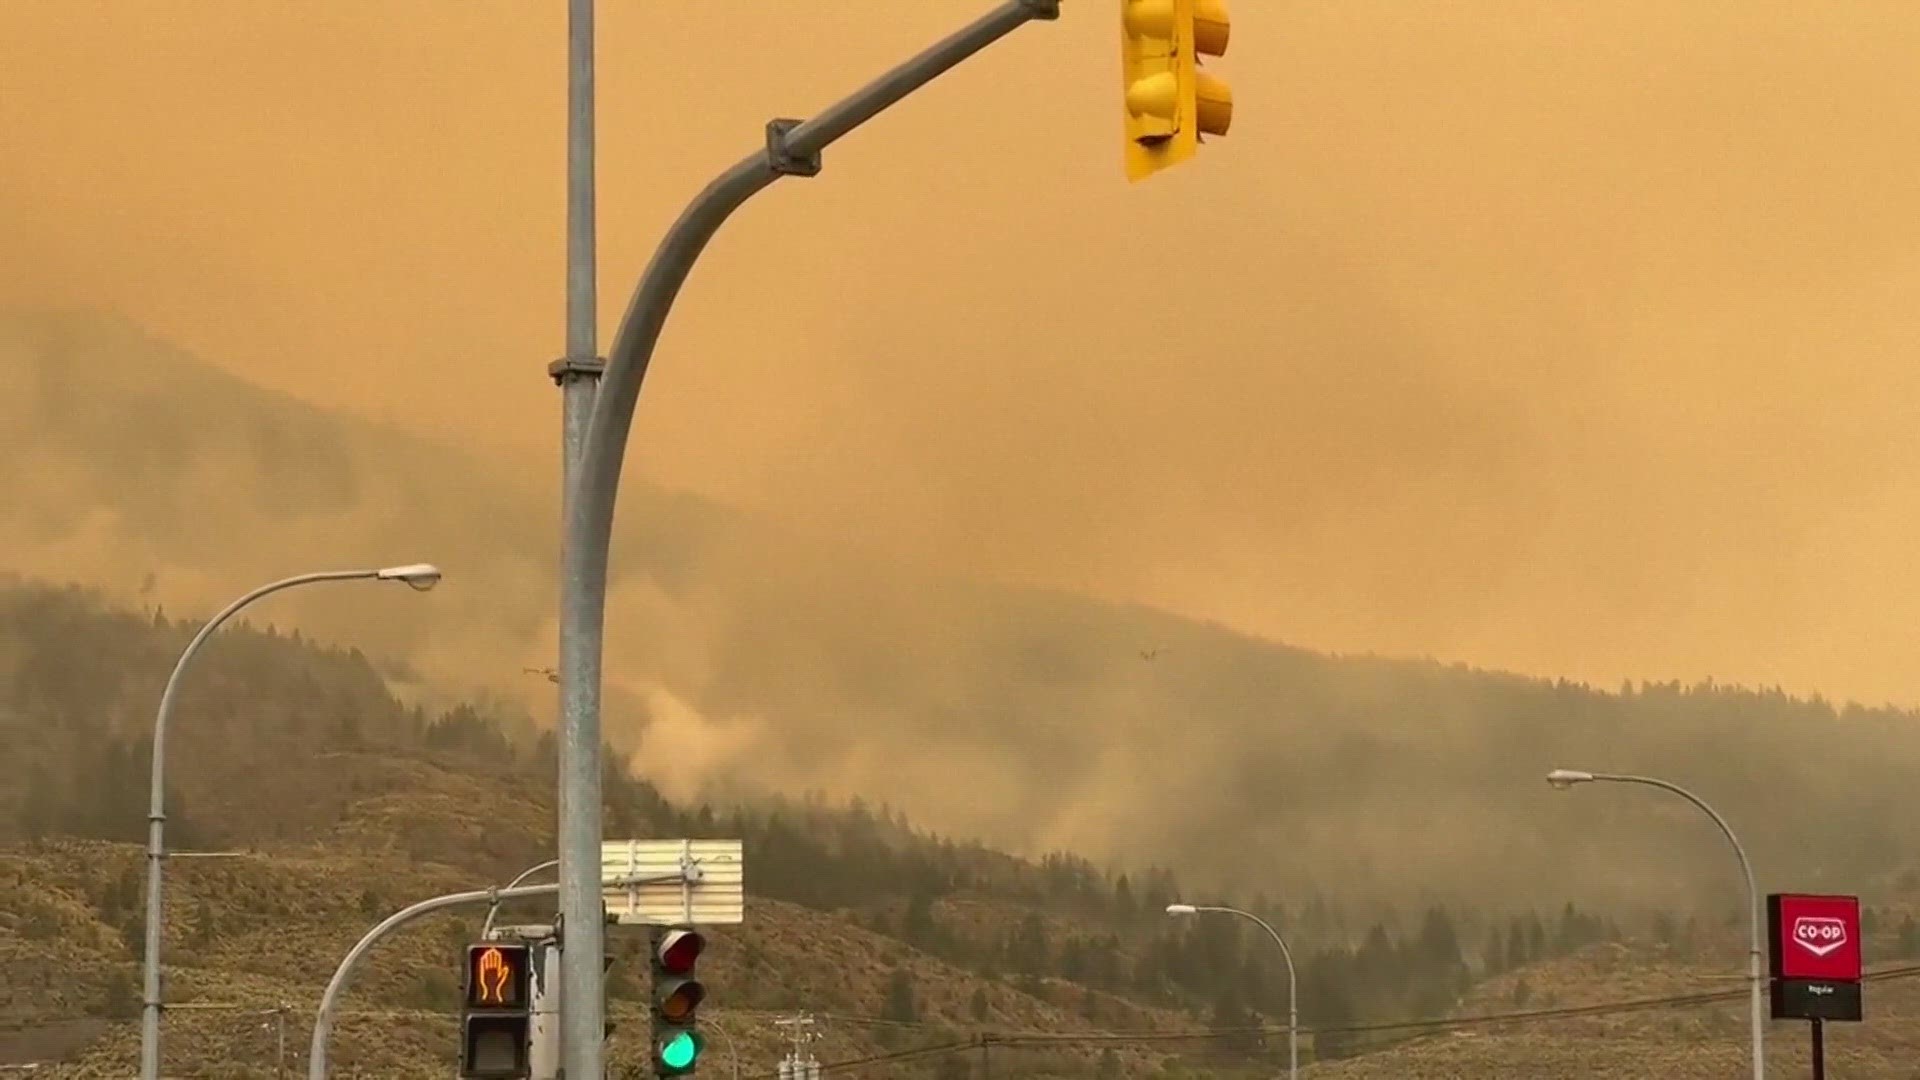 According to Okanogan County Emergency Management, the fire's burned an estimated 15,349 acres.